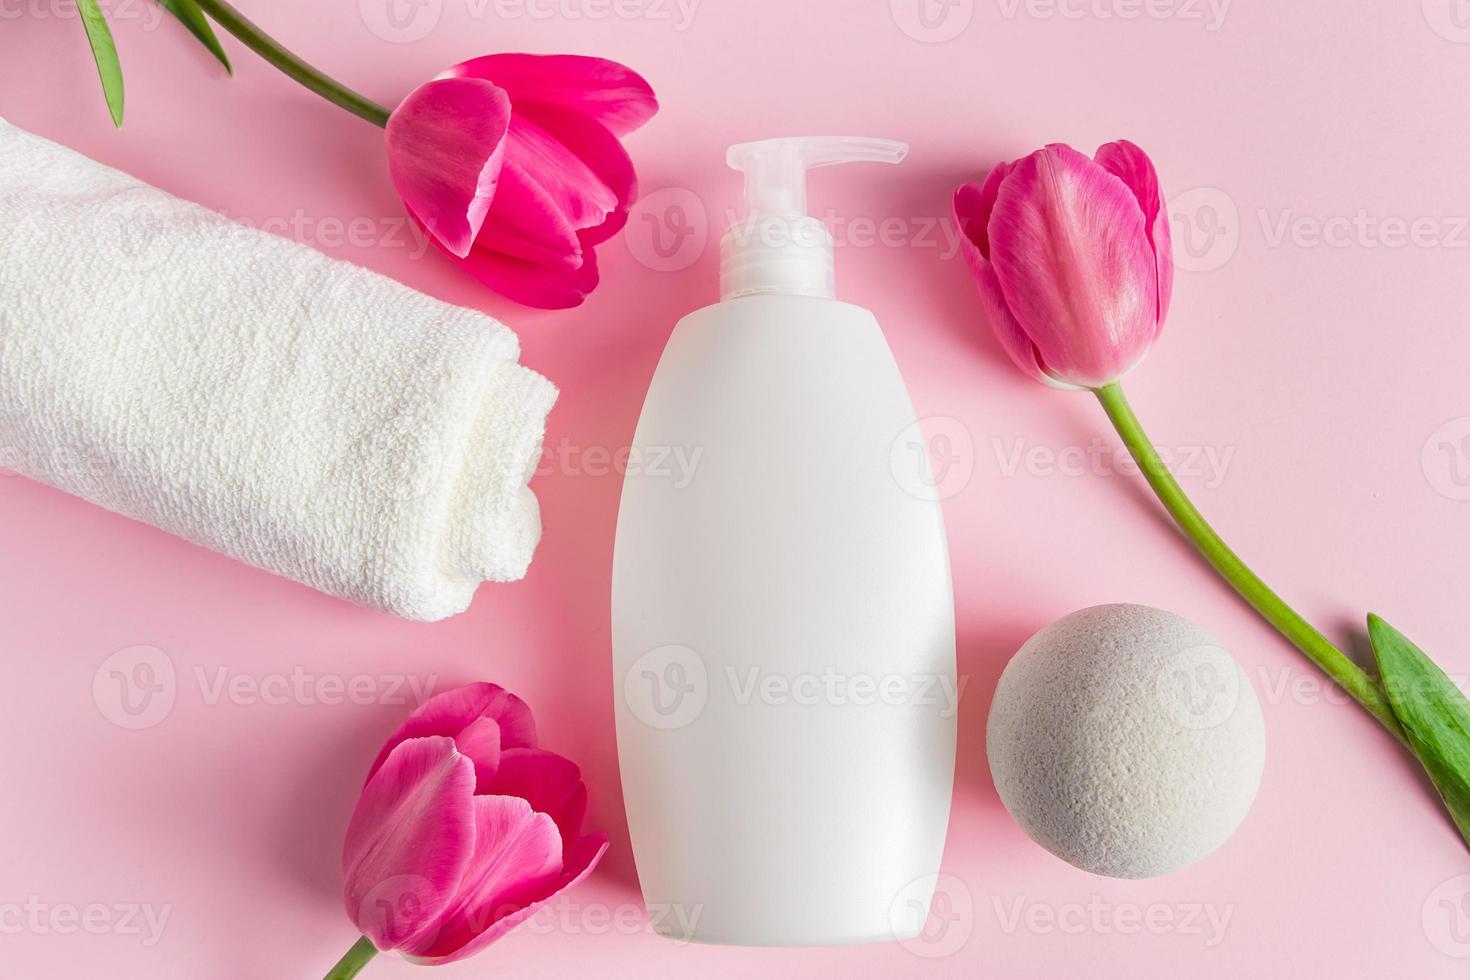 Spa skin care products on a pink background. photo